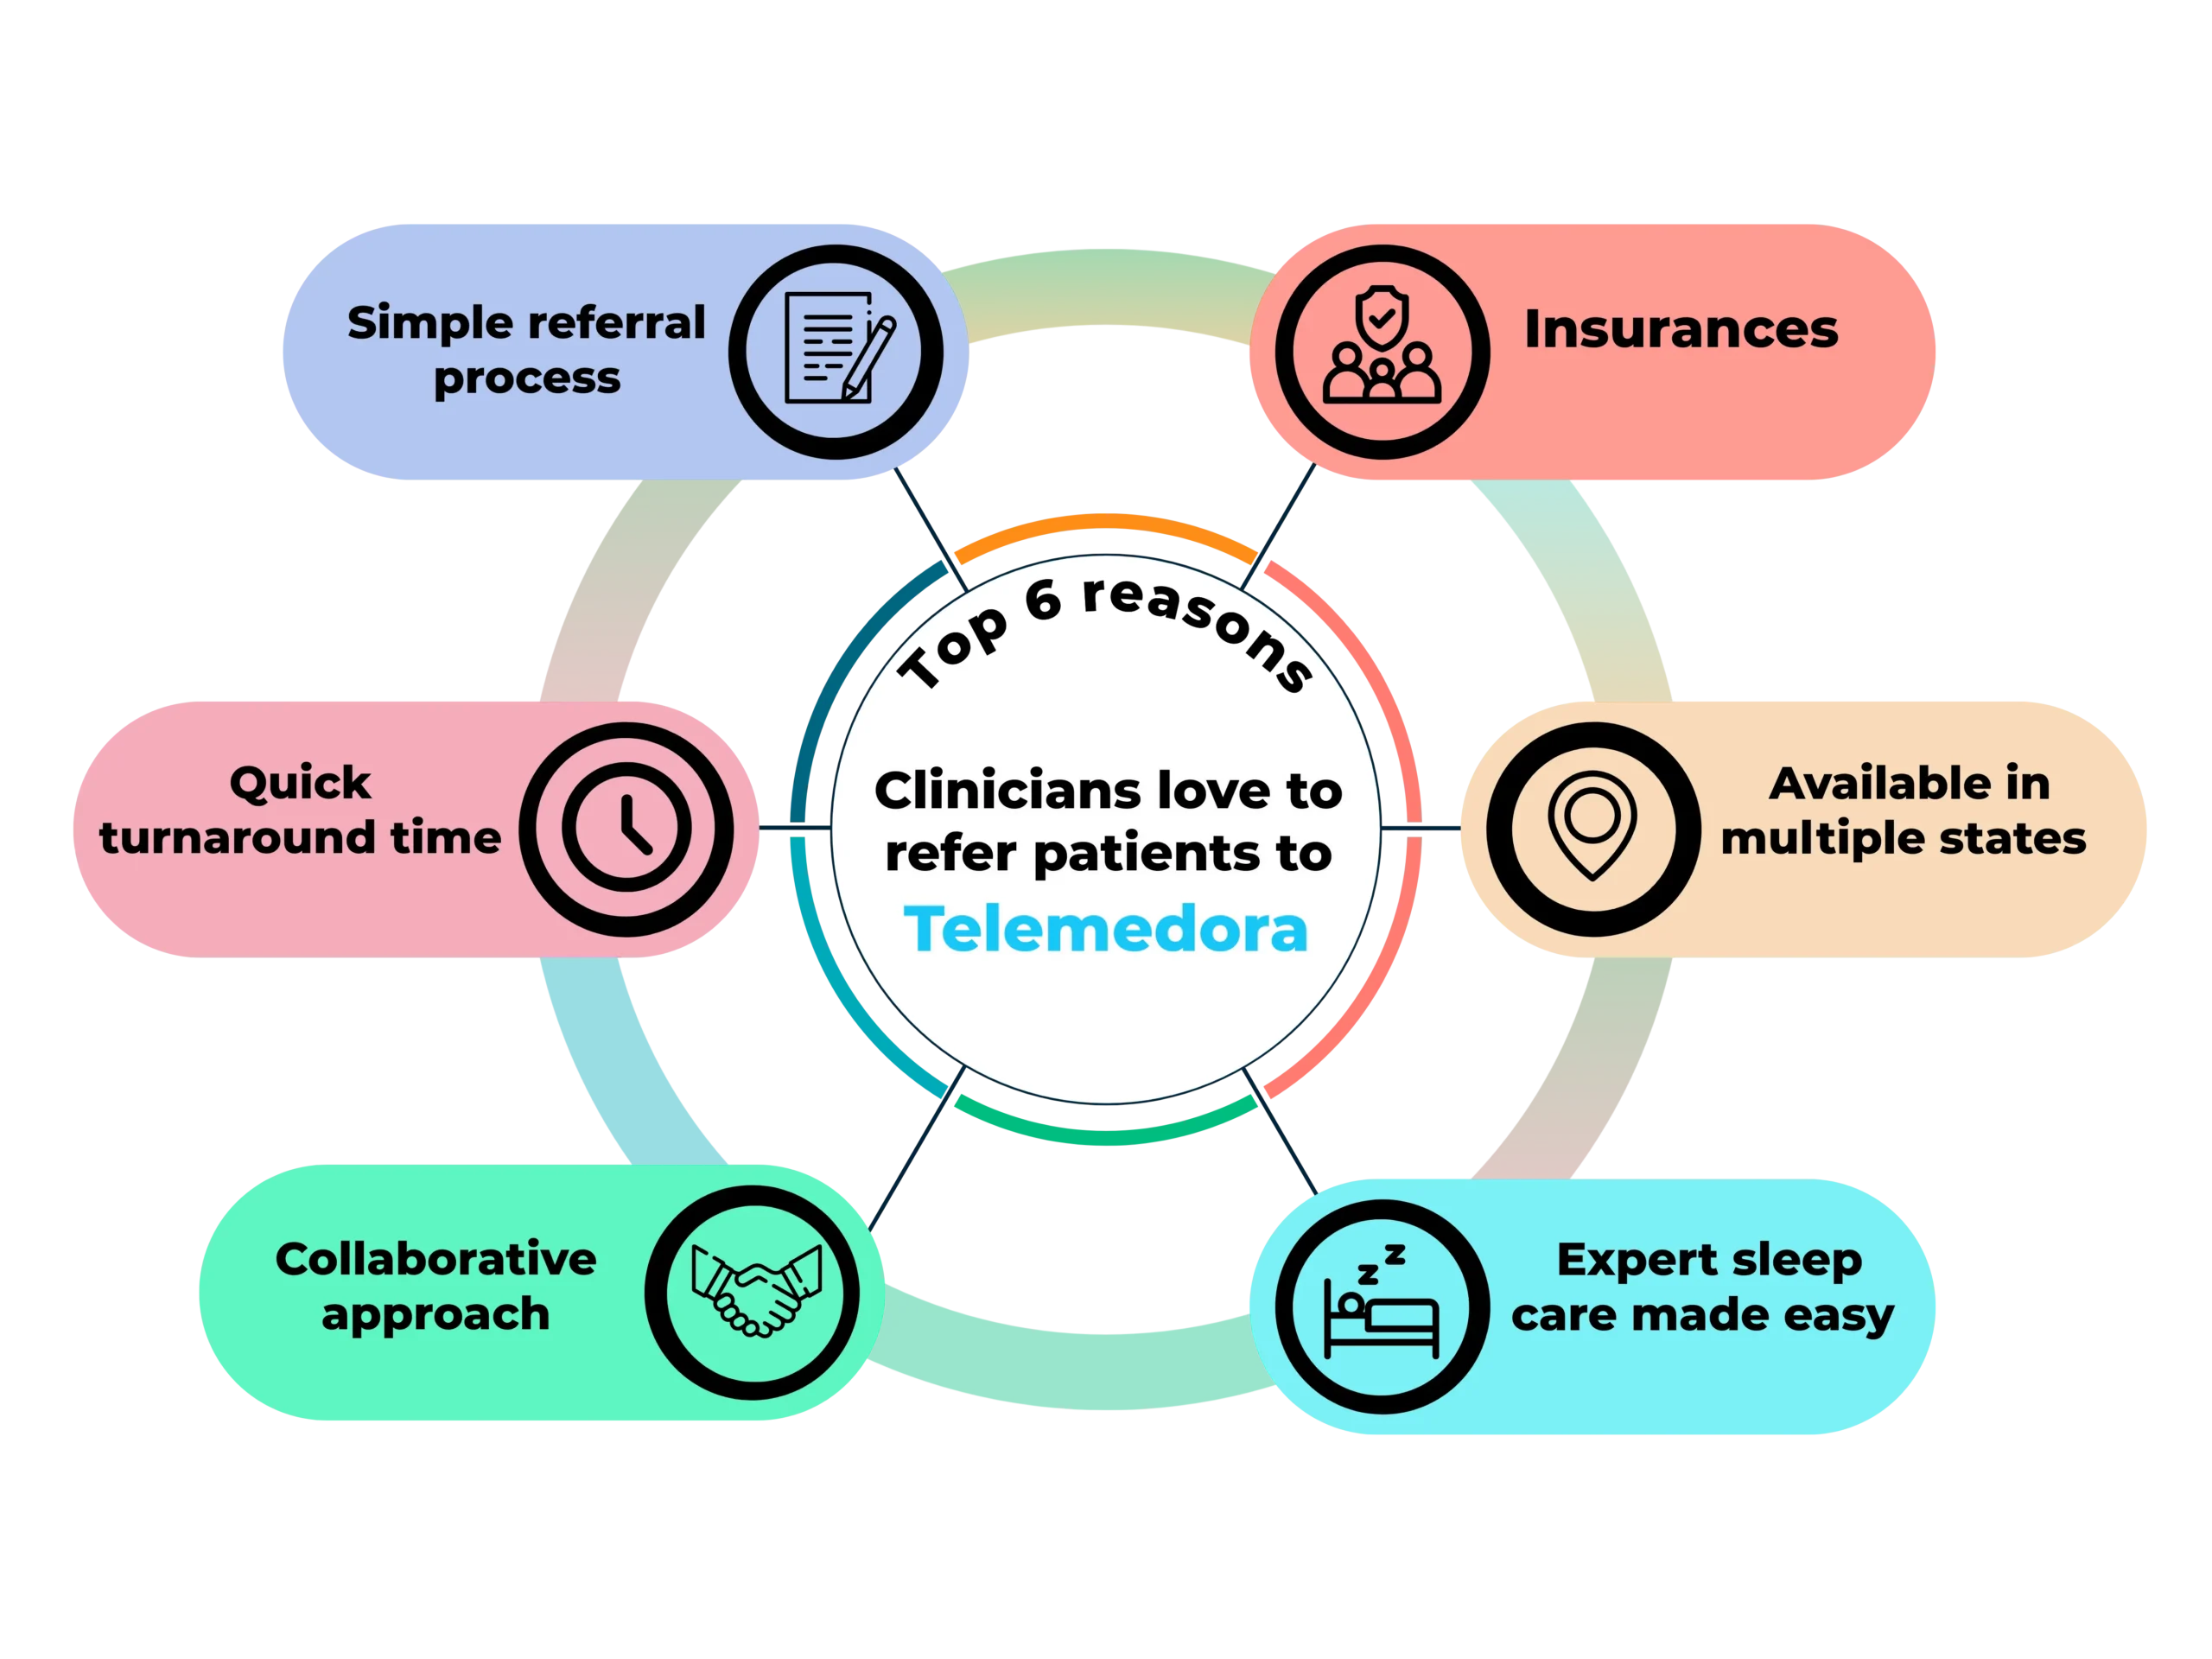 A chart showing top 6 reasons referring clinicians love Telemedora